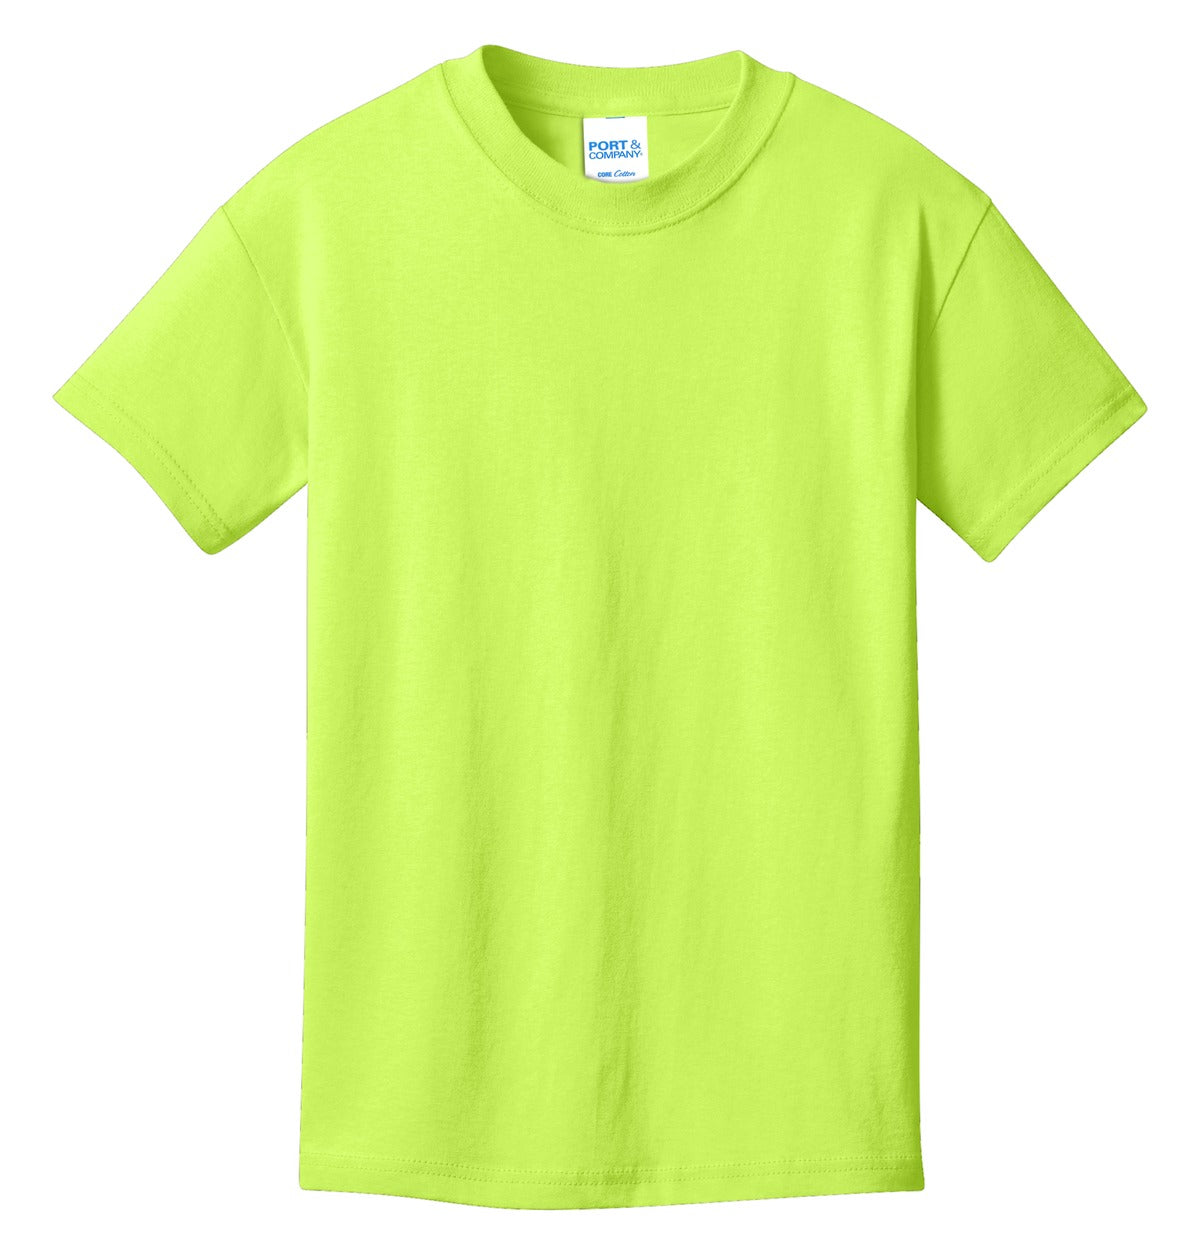 Port & Company - Youth Core Cotton Tee. PC54Y - Neon Yellow